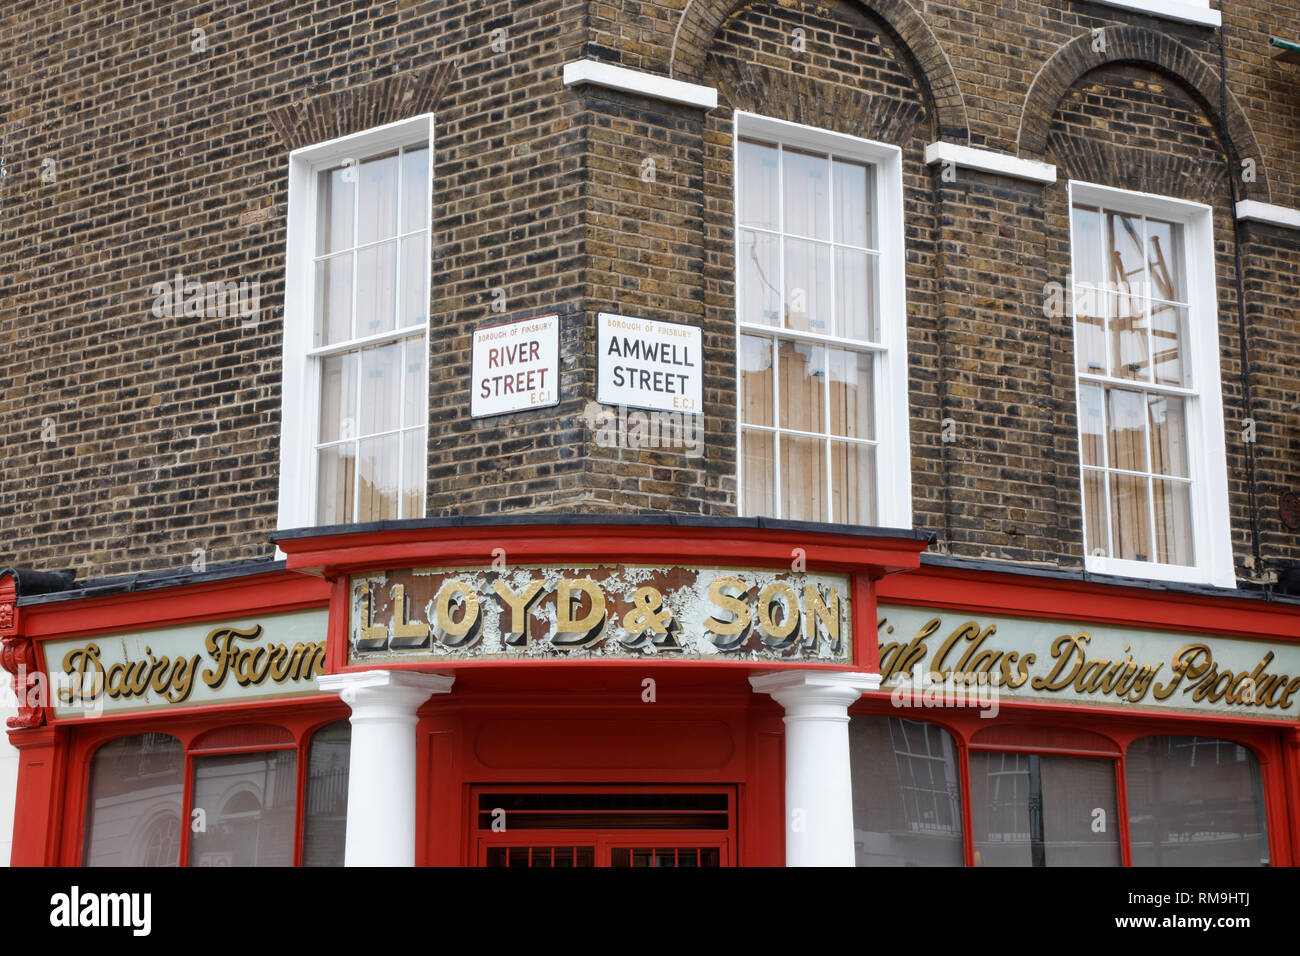 Facade of the old Lloyd & Son Welsh dairy on the corner of Amwell Street and River Street, Finsbury, London, UK Stock Photo